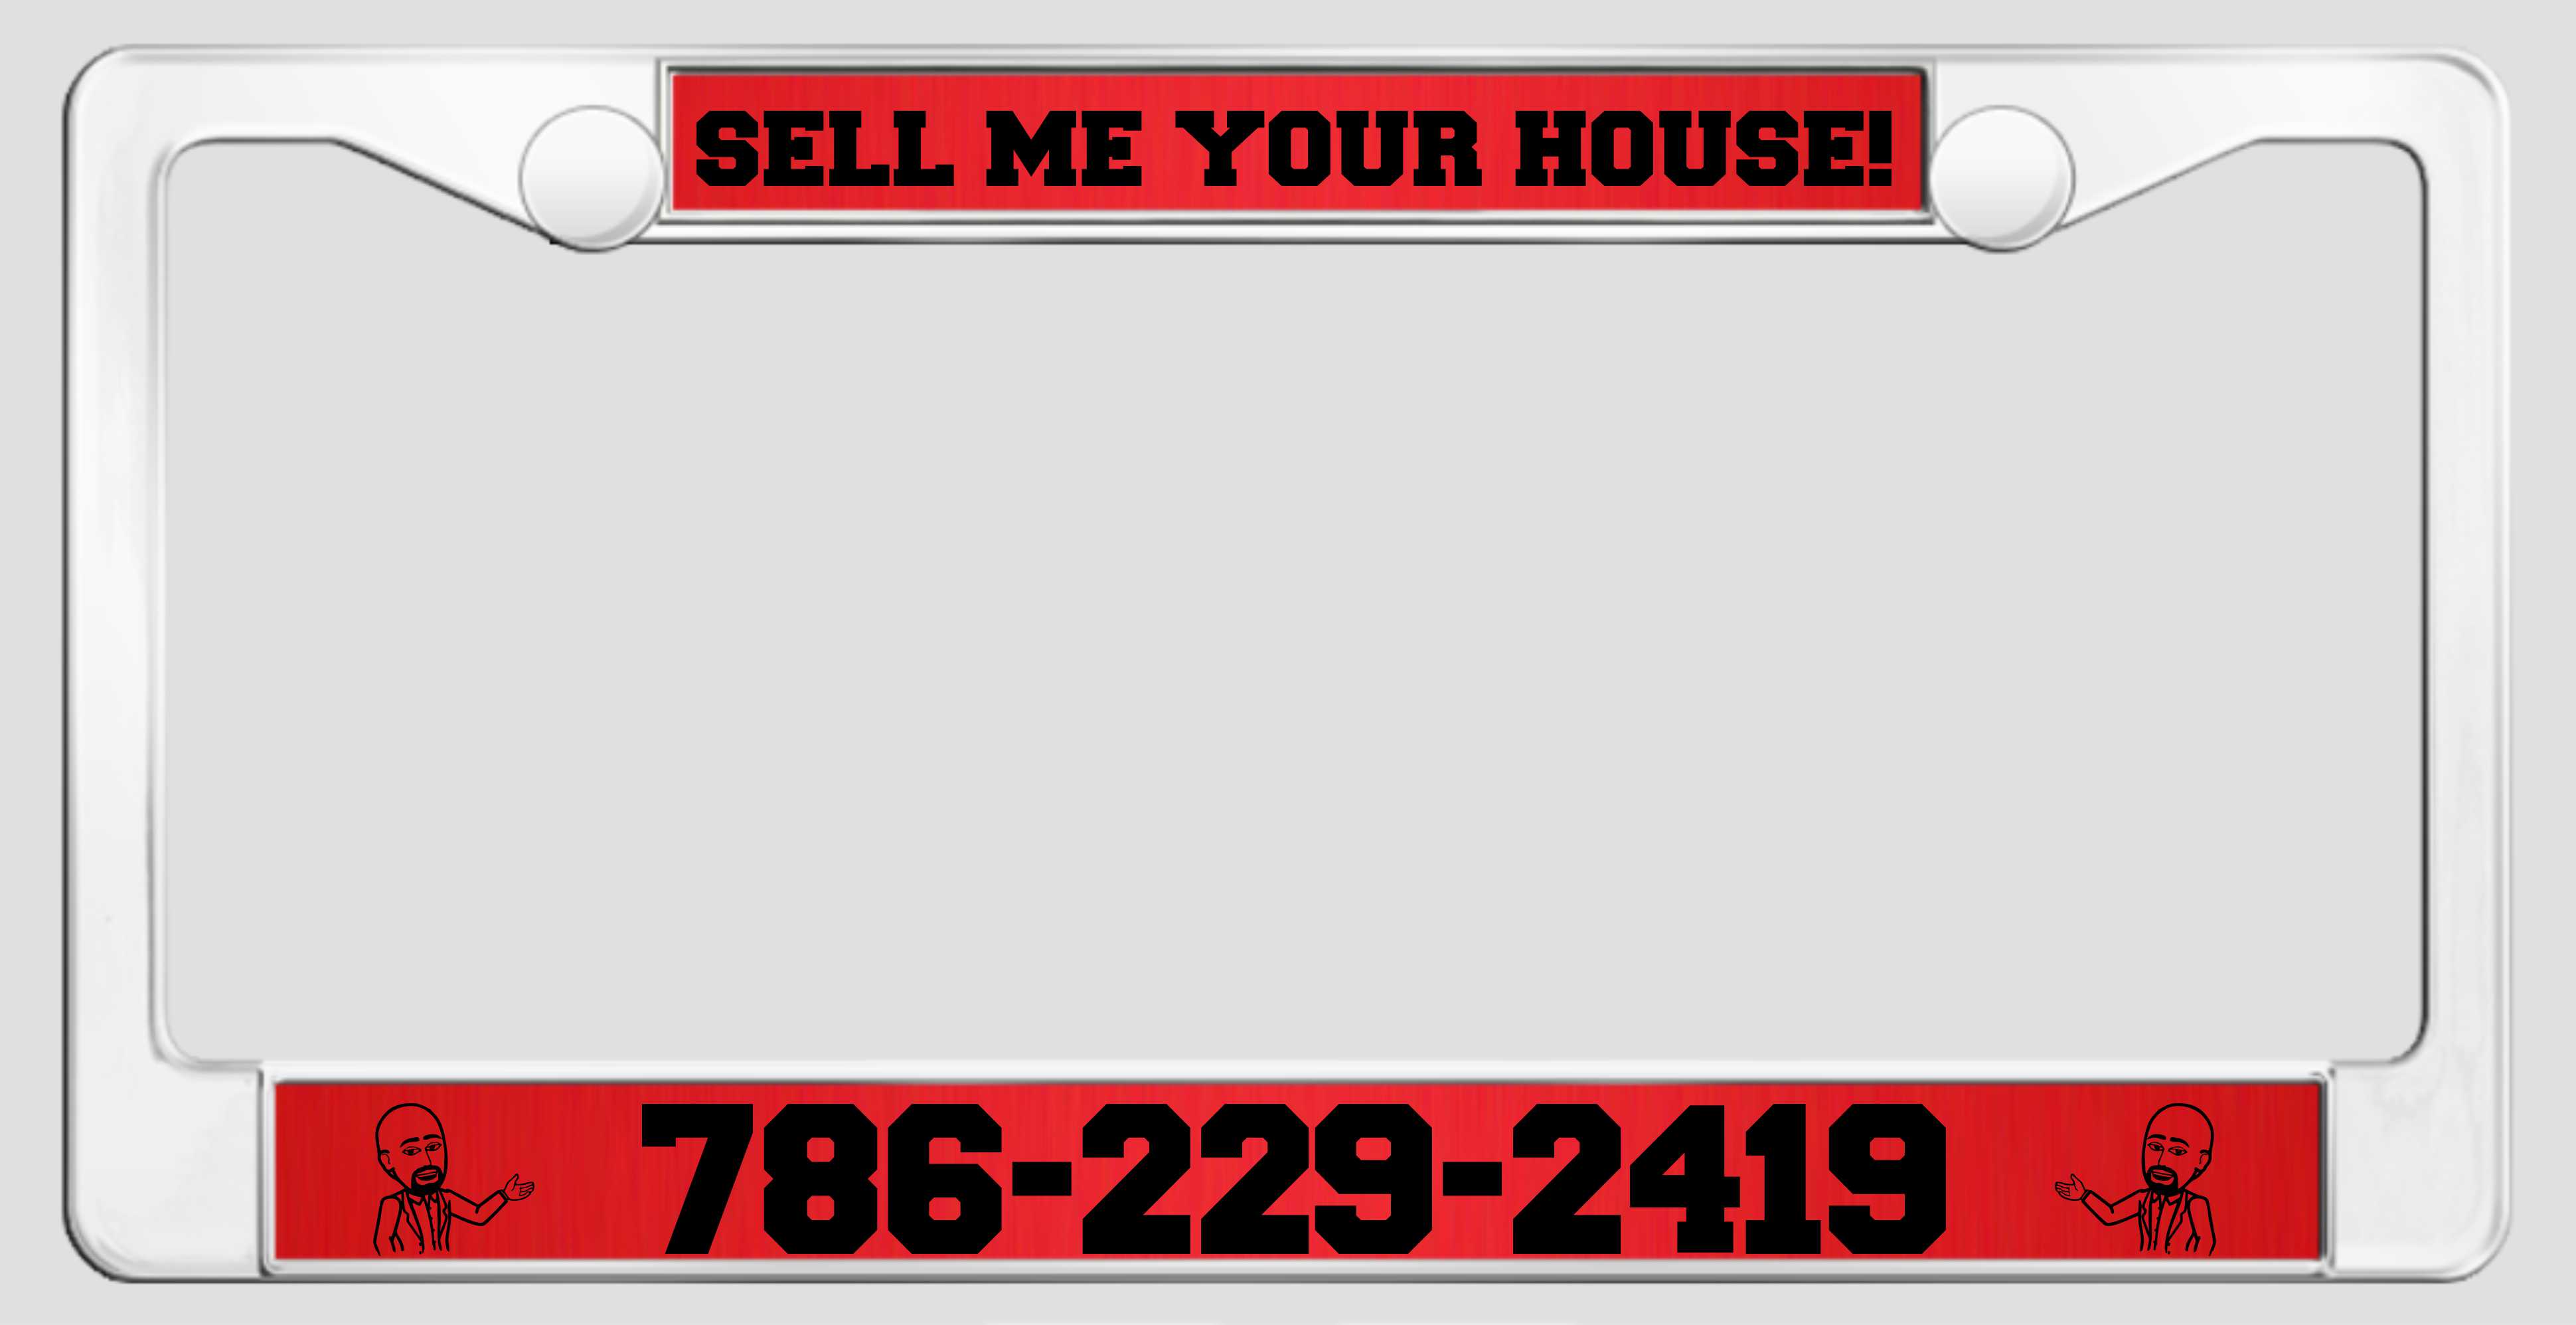 SELL ME YOUR HOUSE! Plastic license plate frame